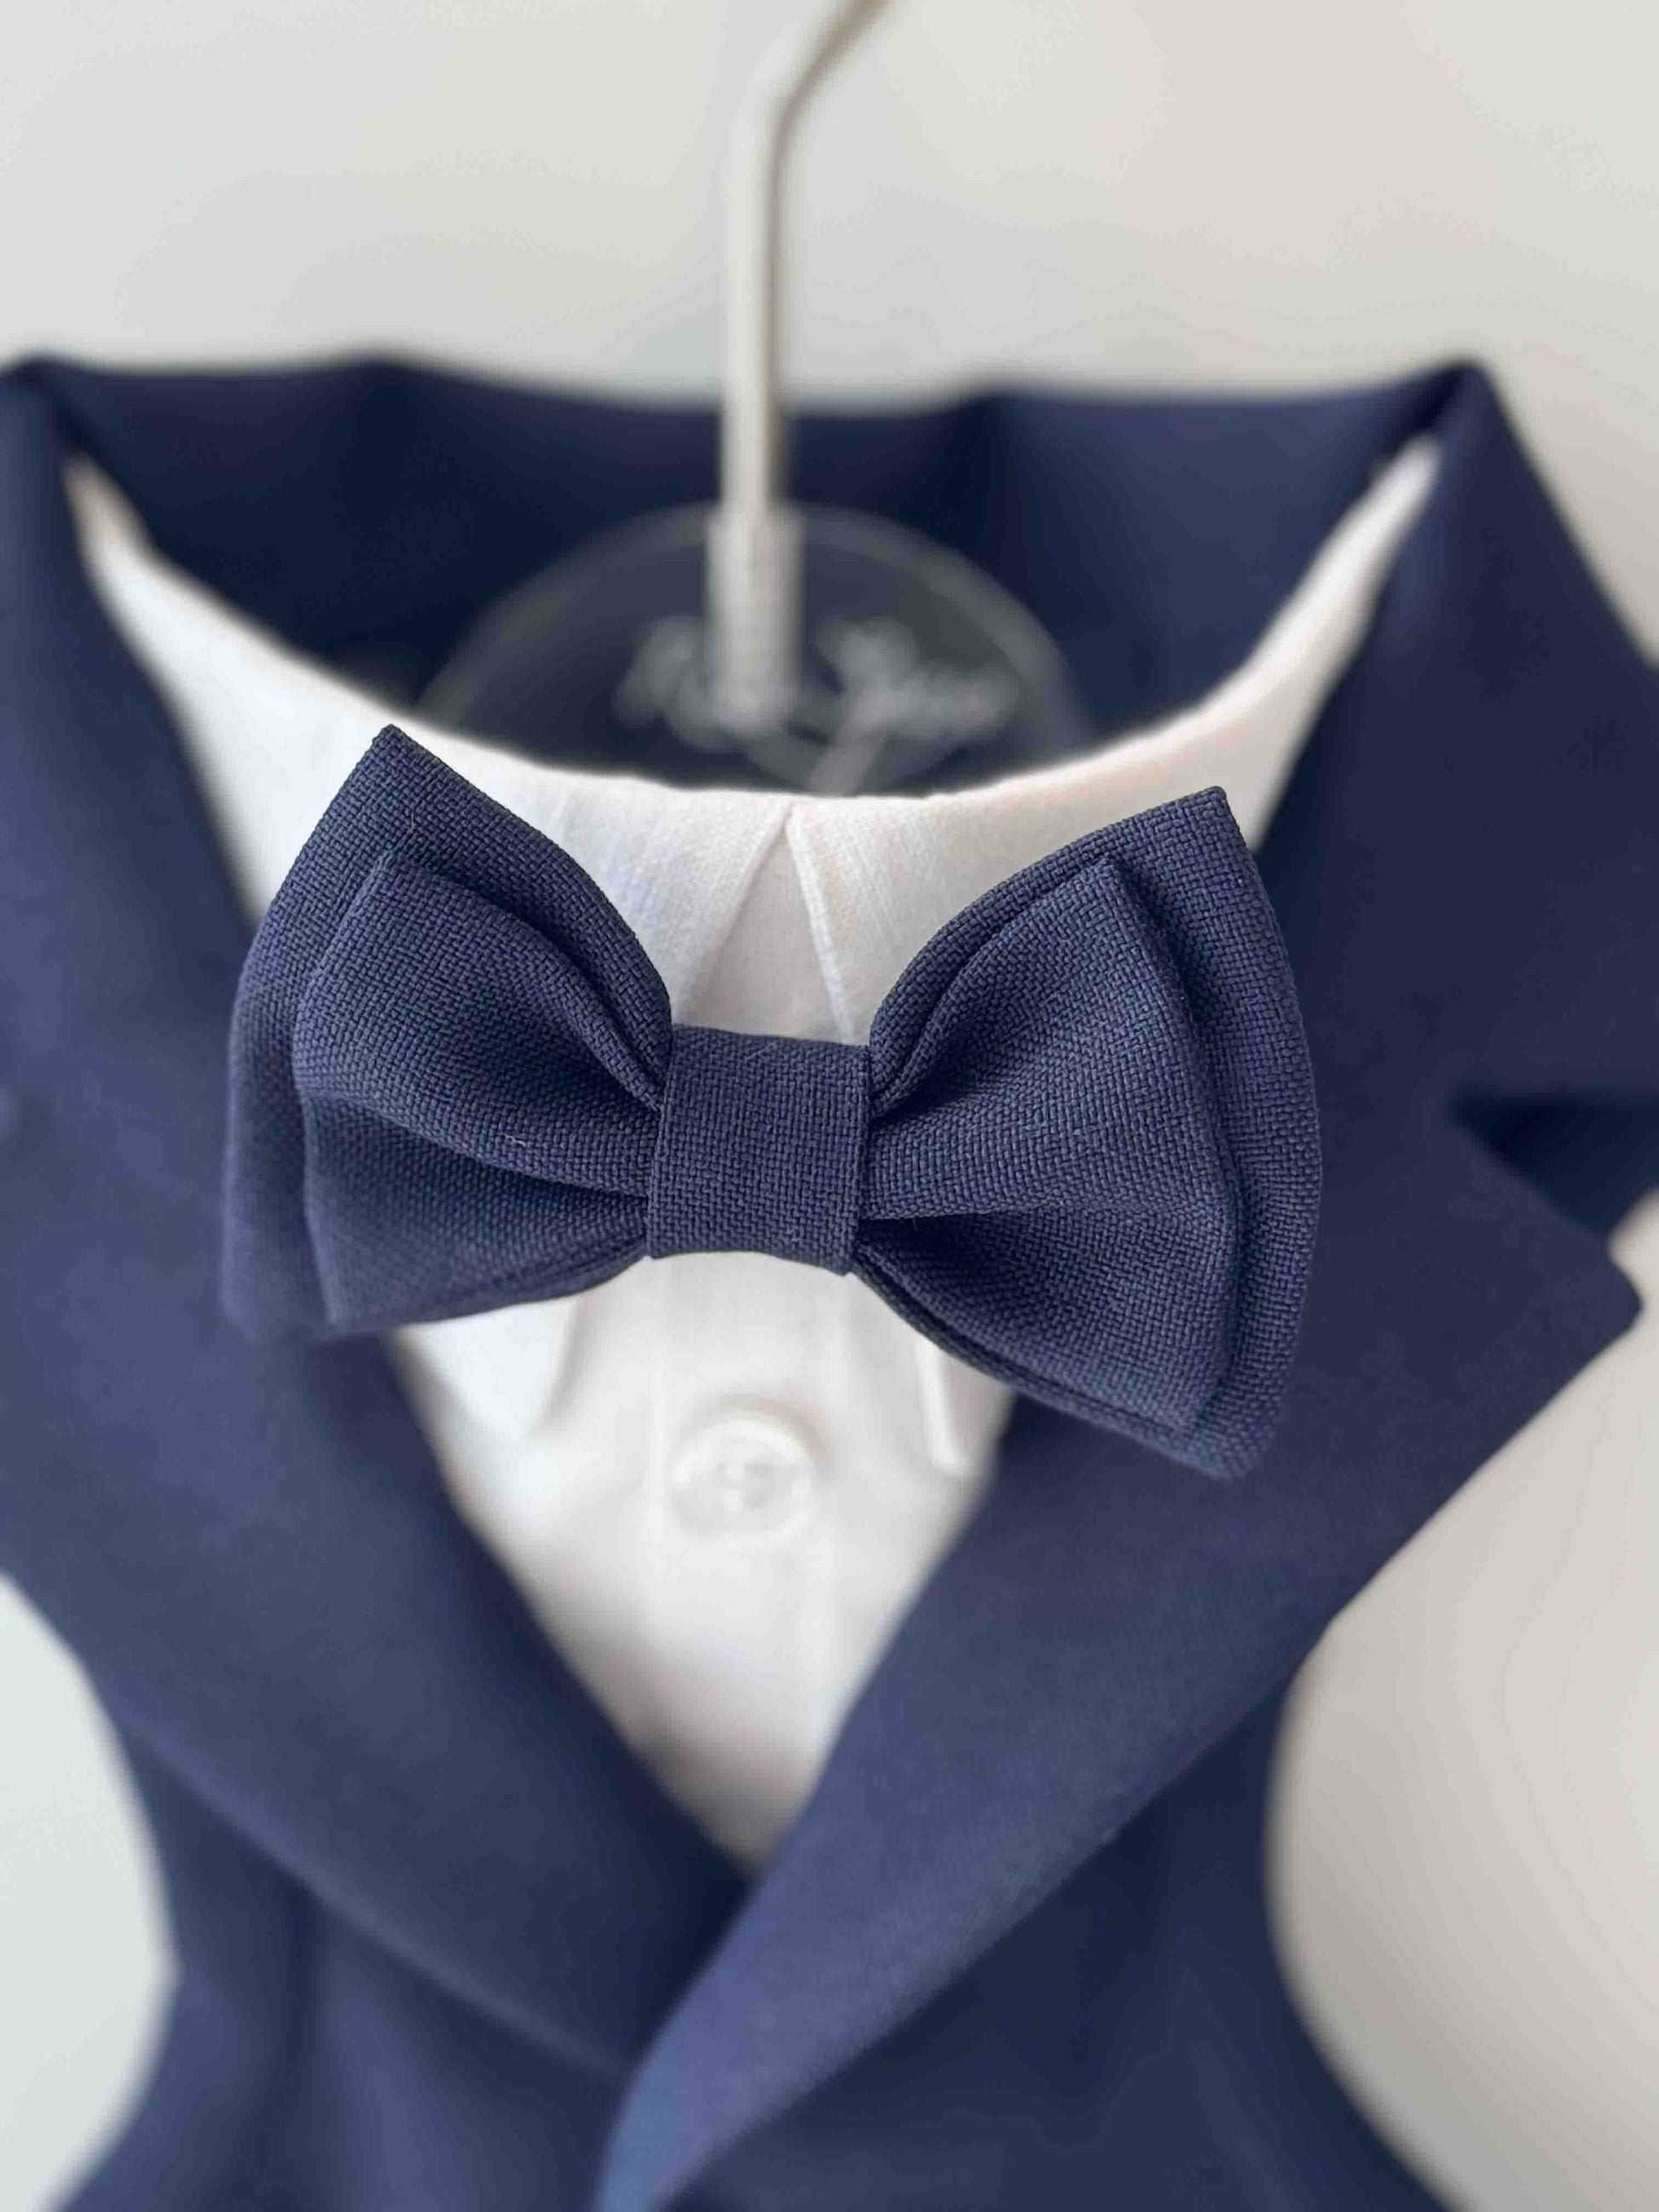 our double bow tie to be applied on tuxedos for dogs